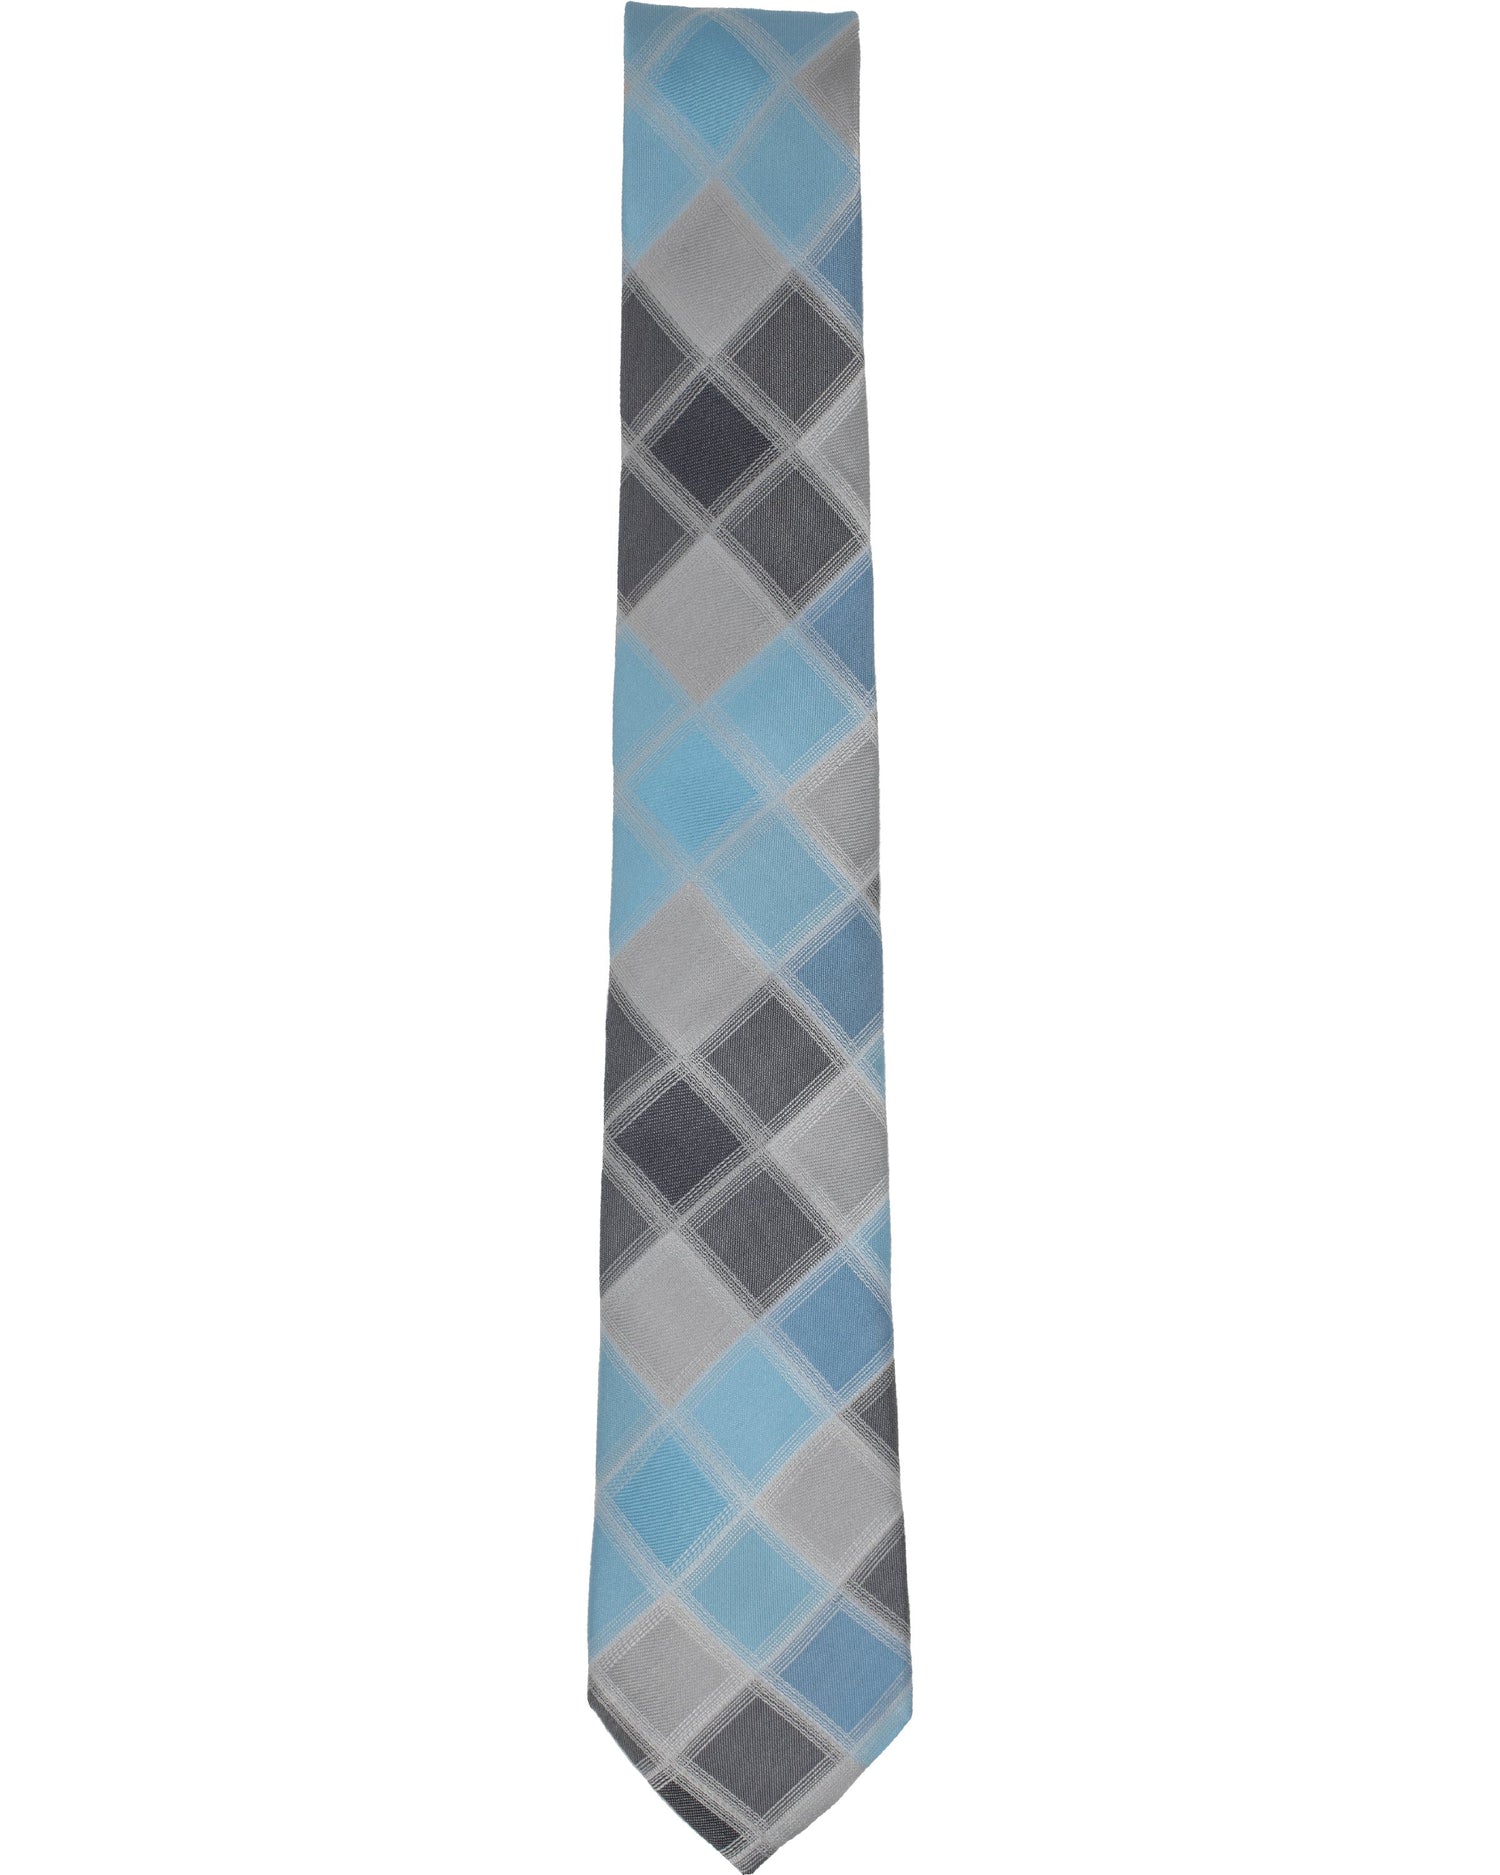 Archie Aqua Tie - Lords Of Harlech